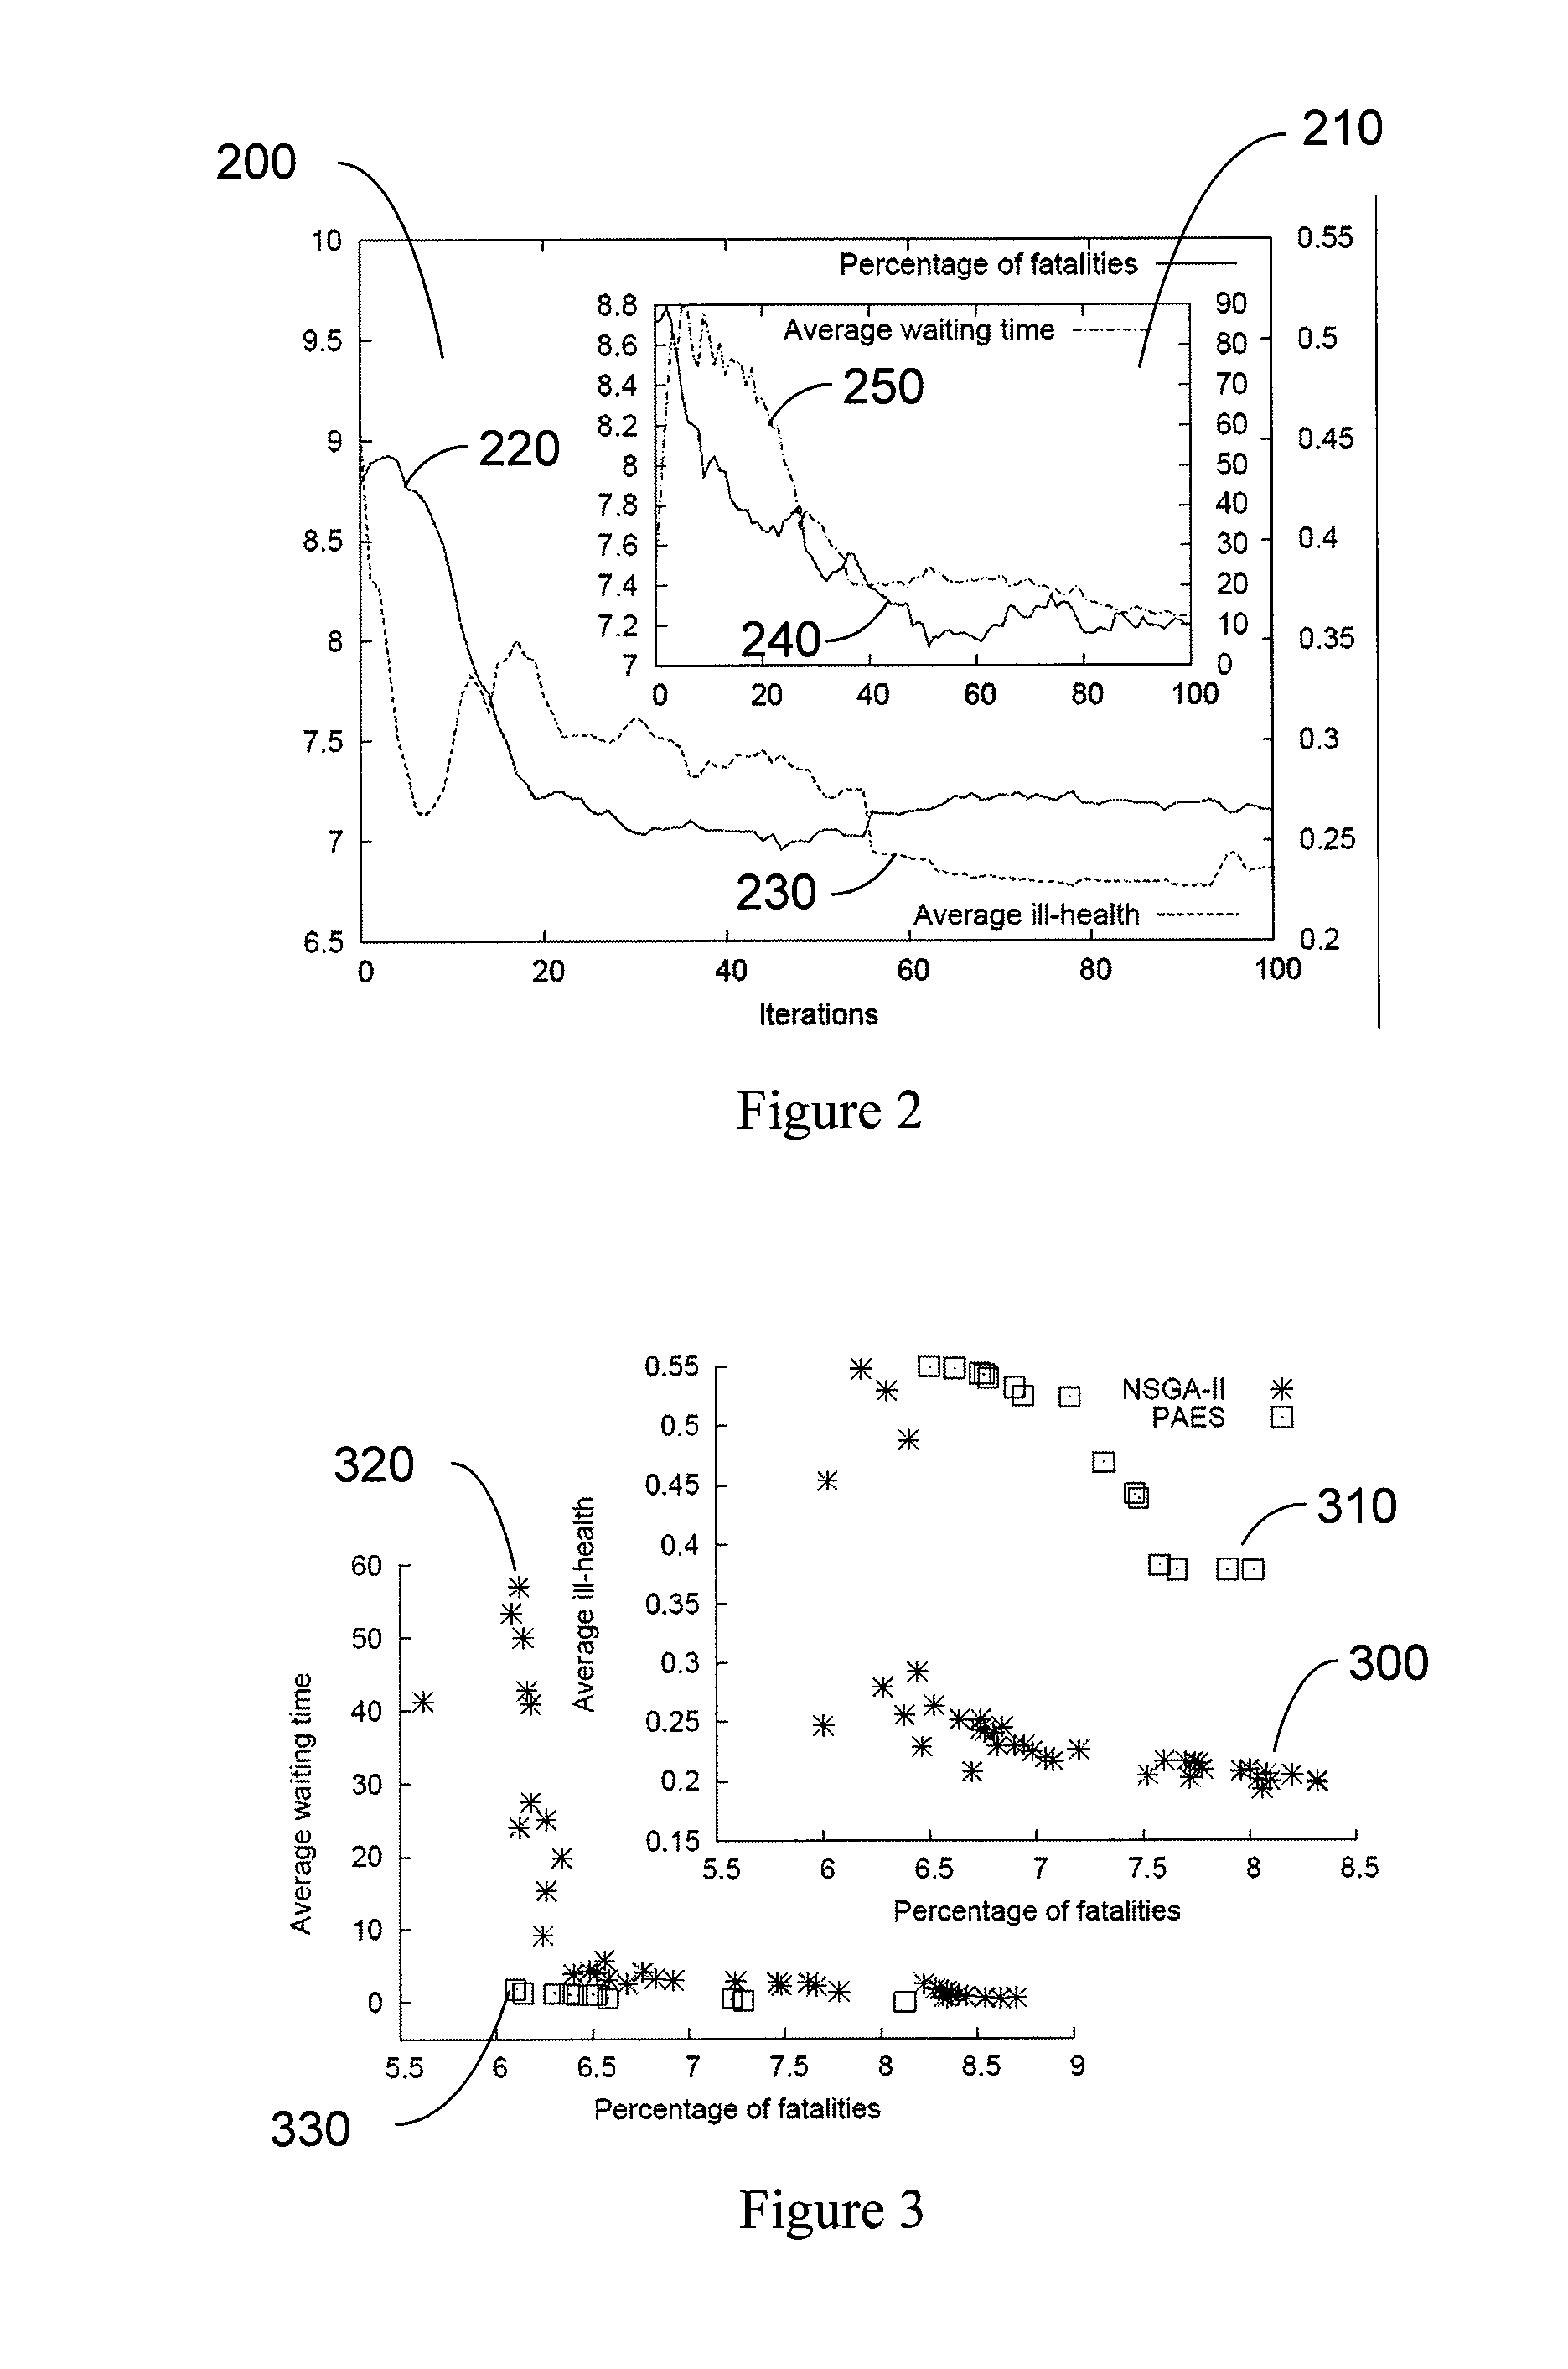 System, method, and computer-accessible medium for providing a multi-objective evolutionary optimization of agent-based models